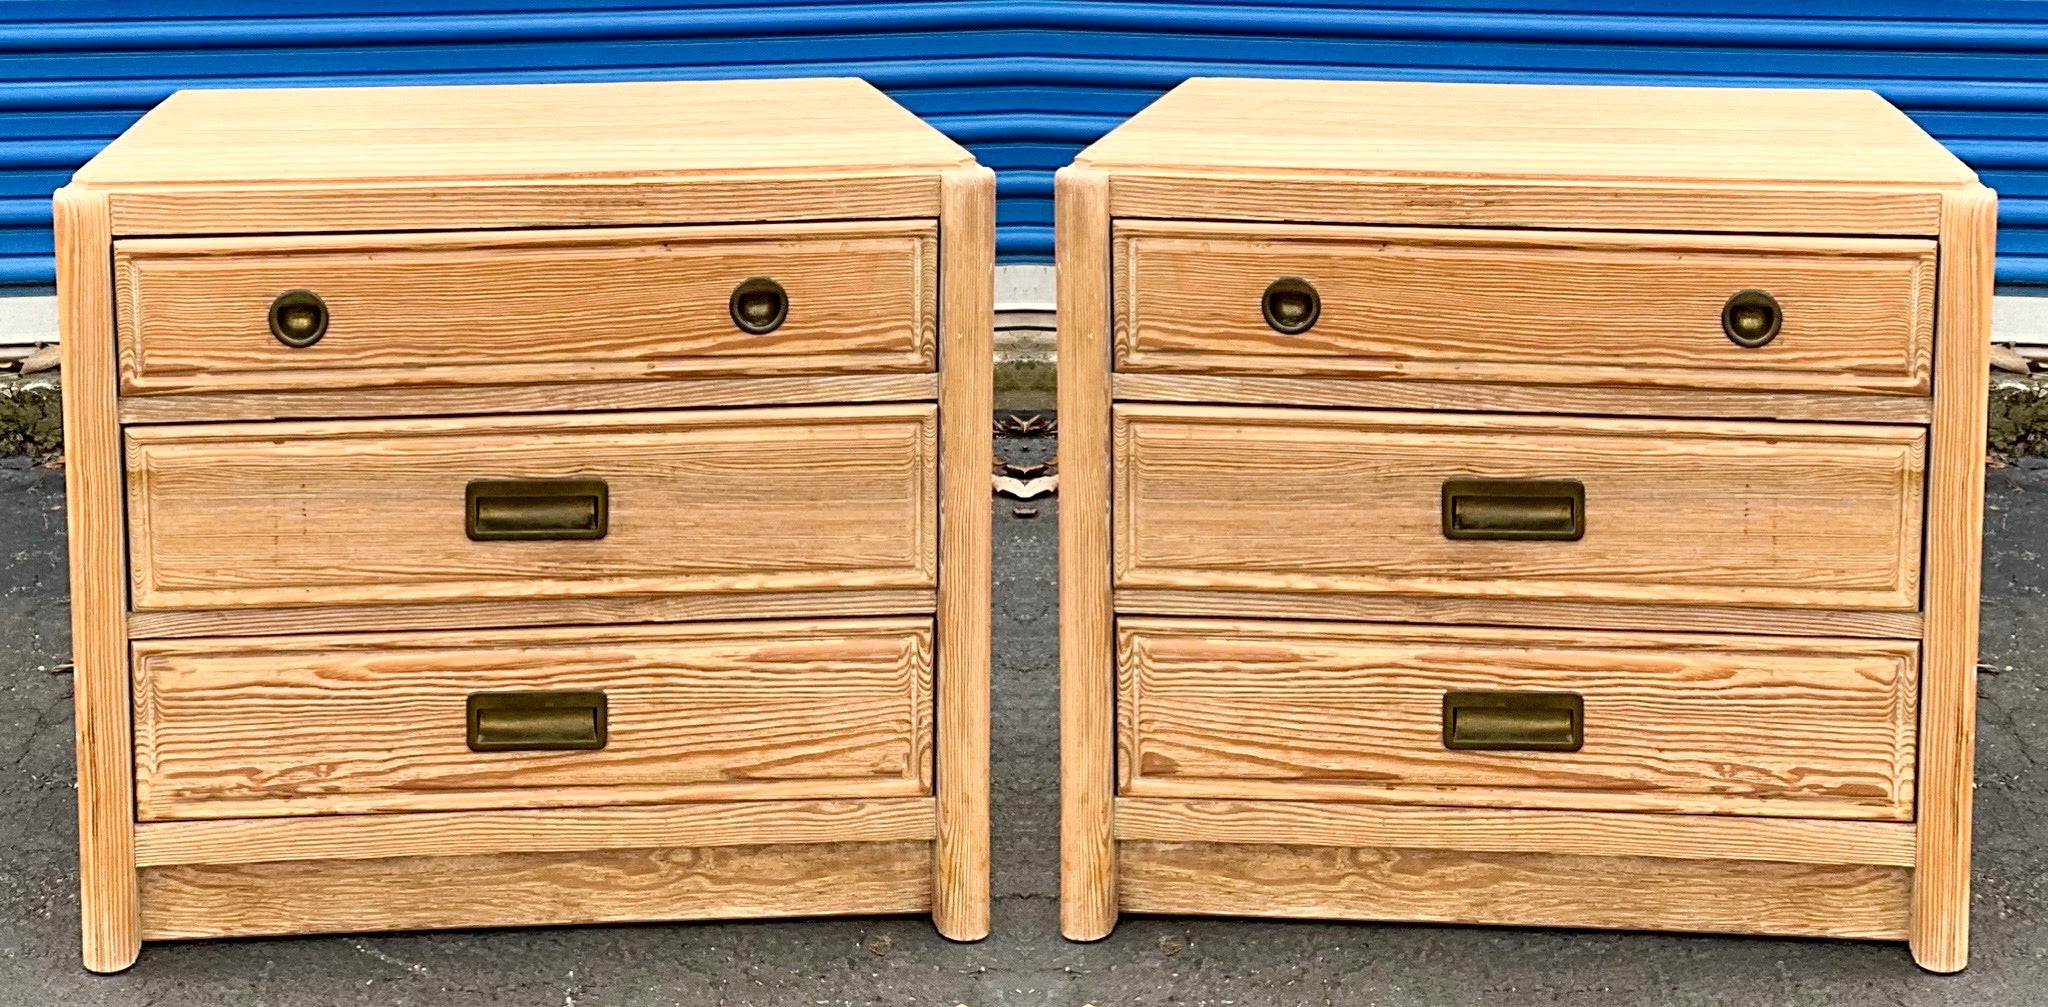 This is a pair of cerused pine Campaign style side tables or nightstands by Henry Link. They are in very good condition.

My shipping is for the Continental US only.